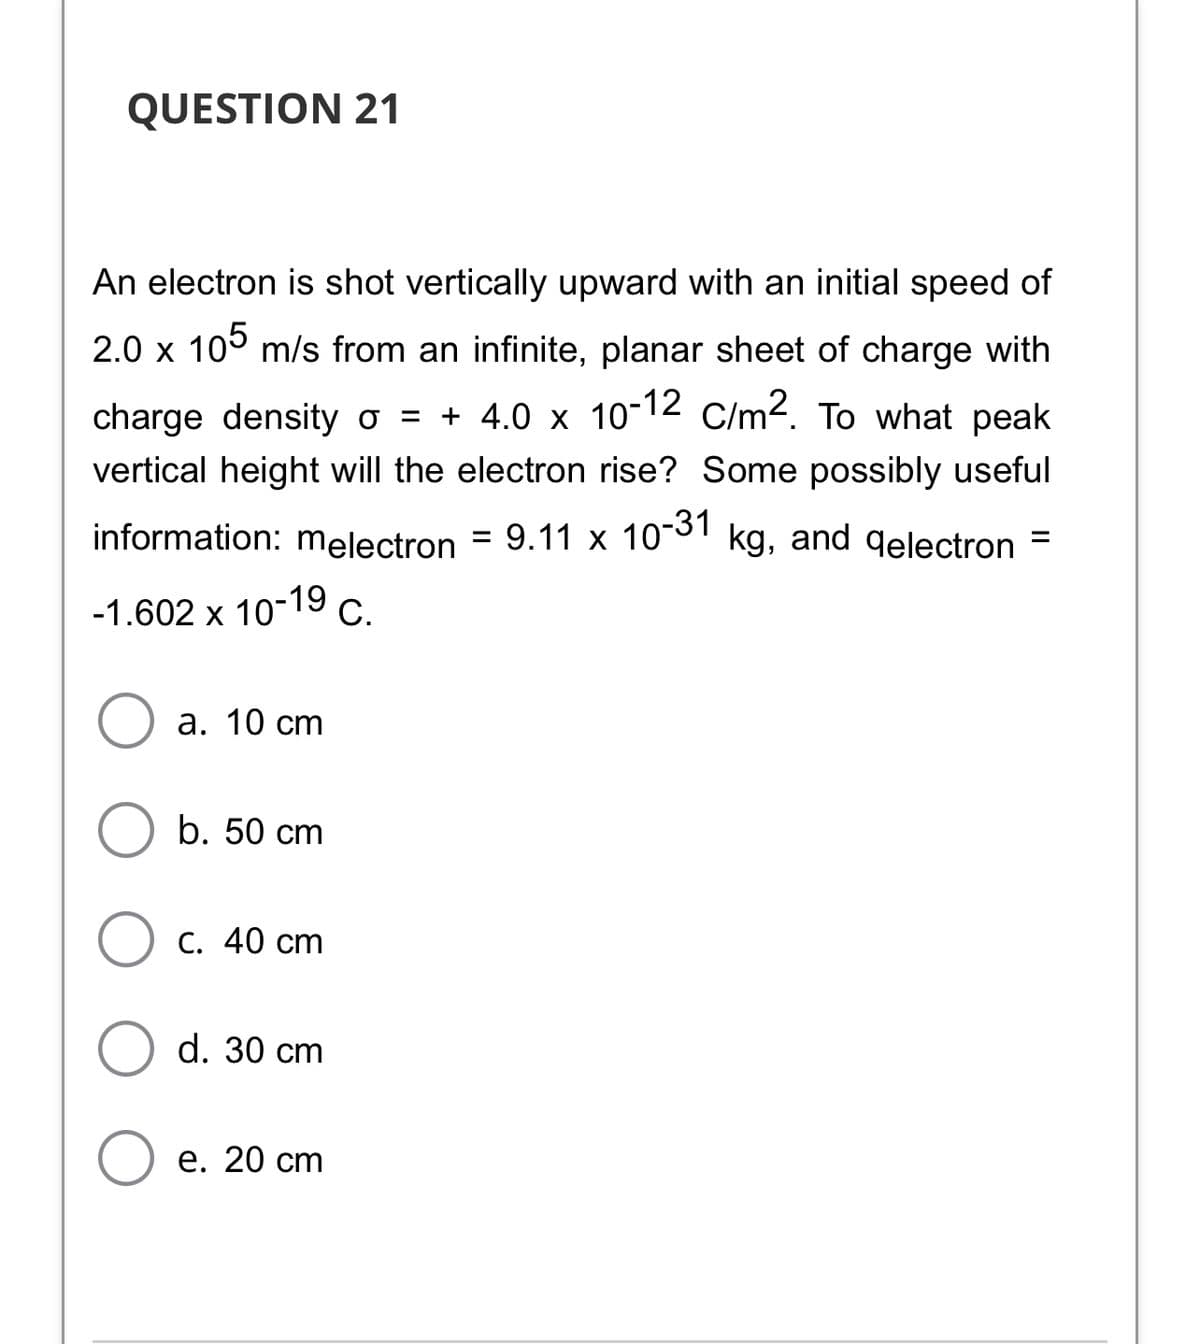 QUESTION 21
An electron is shot vertically upward with an initial speed of
2.0 x 105 m/s from an infinite, planar sheet of charge with
charge density o = + 4.0 x 10-12 C/m2. To what peak
vertical height will the electron rise? Some possibly useful
information: melectron = 9.11 x 10-31 kg, and qelectron =
-1.602 x 10-19 C.
а. 10 сm
b. 50 cm
С. 40 cт
d. 30 cm
е. 20 ст
